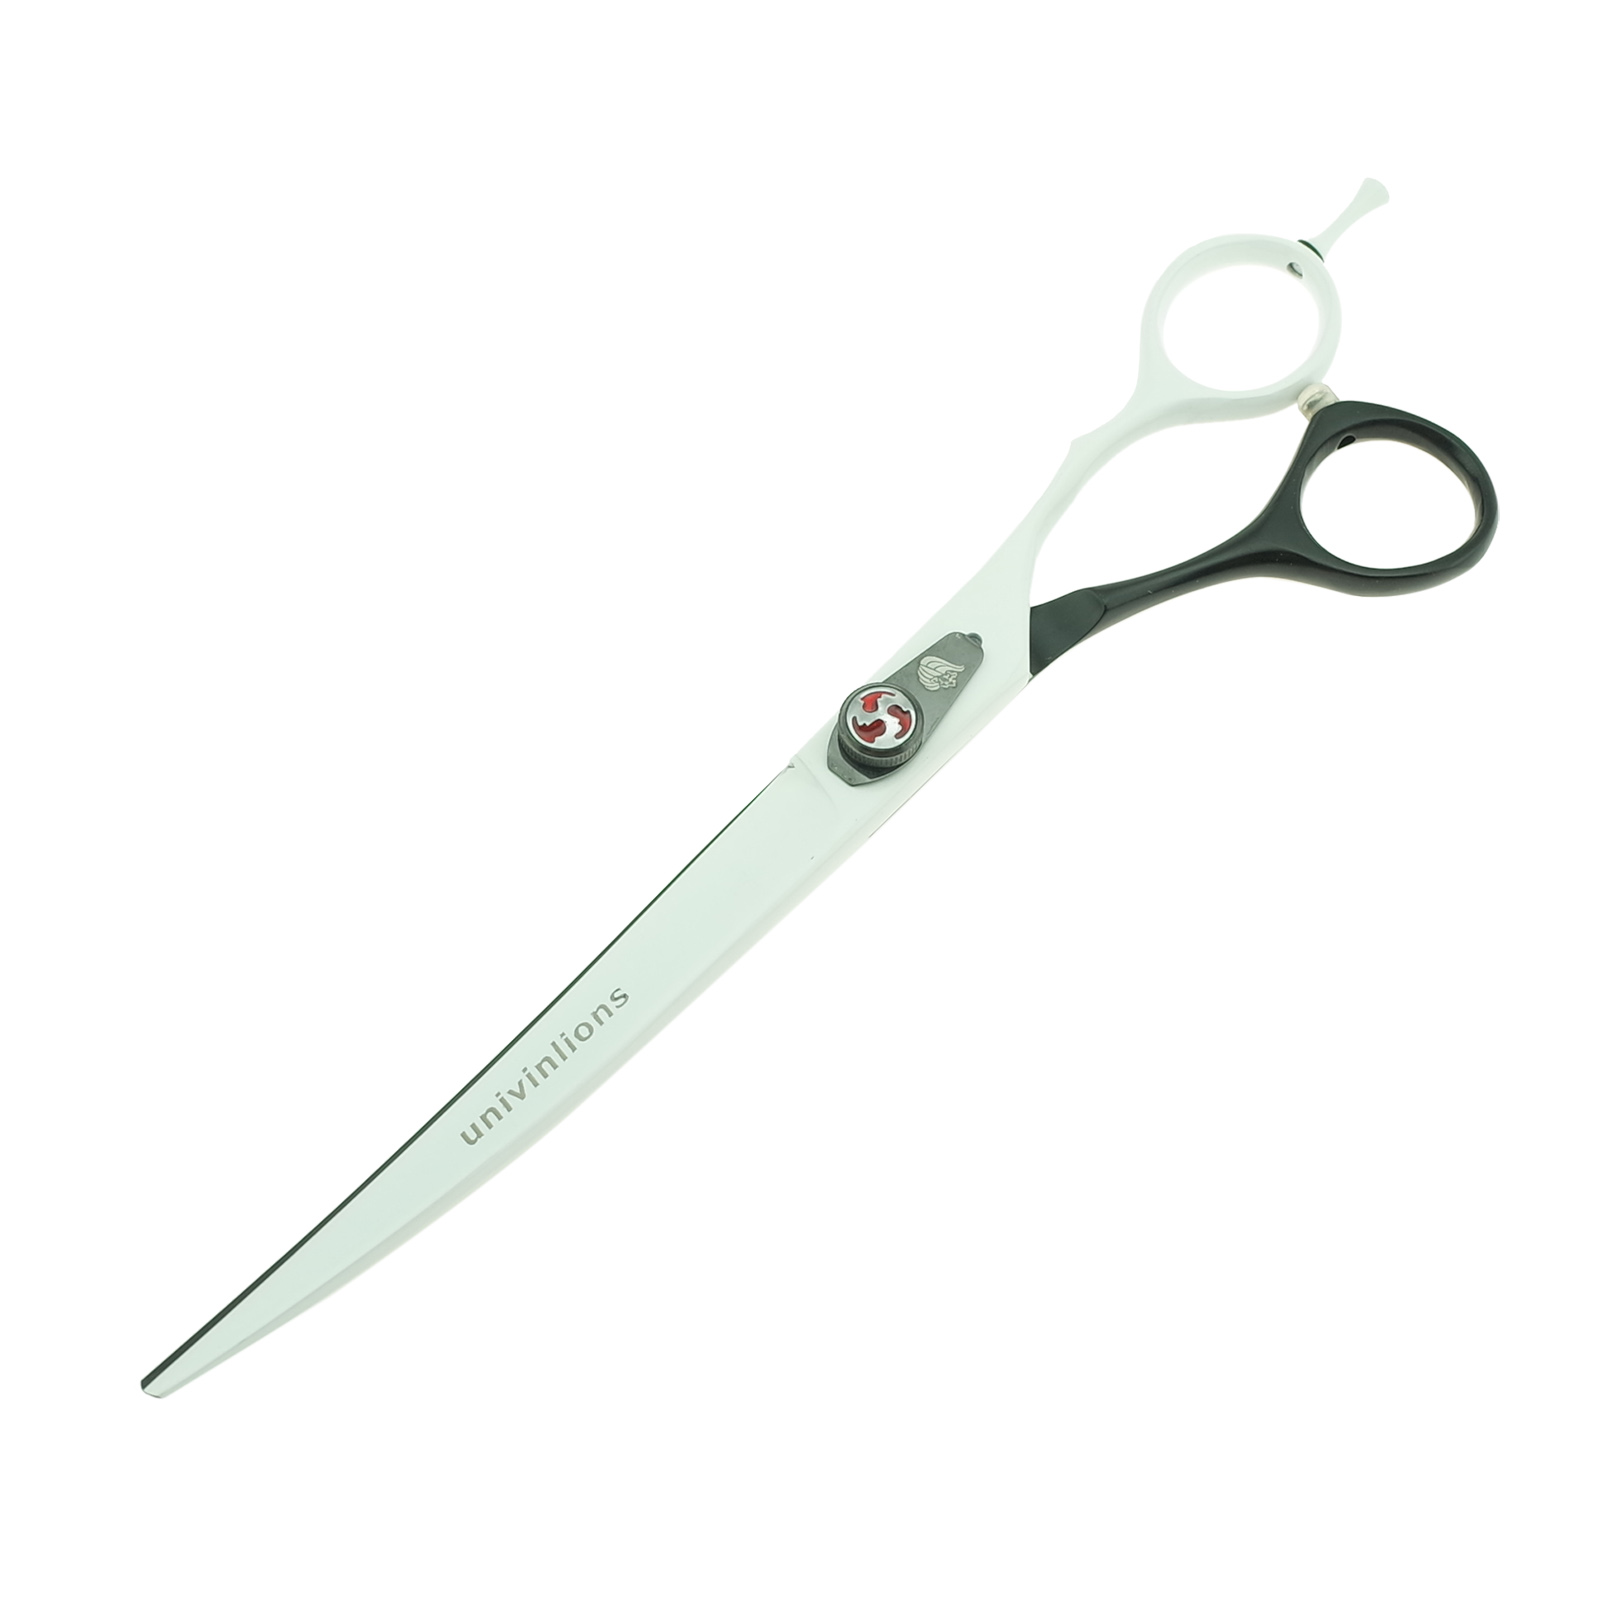 Univinlions 8.0 Inch Up Curved Shears Professional ..